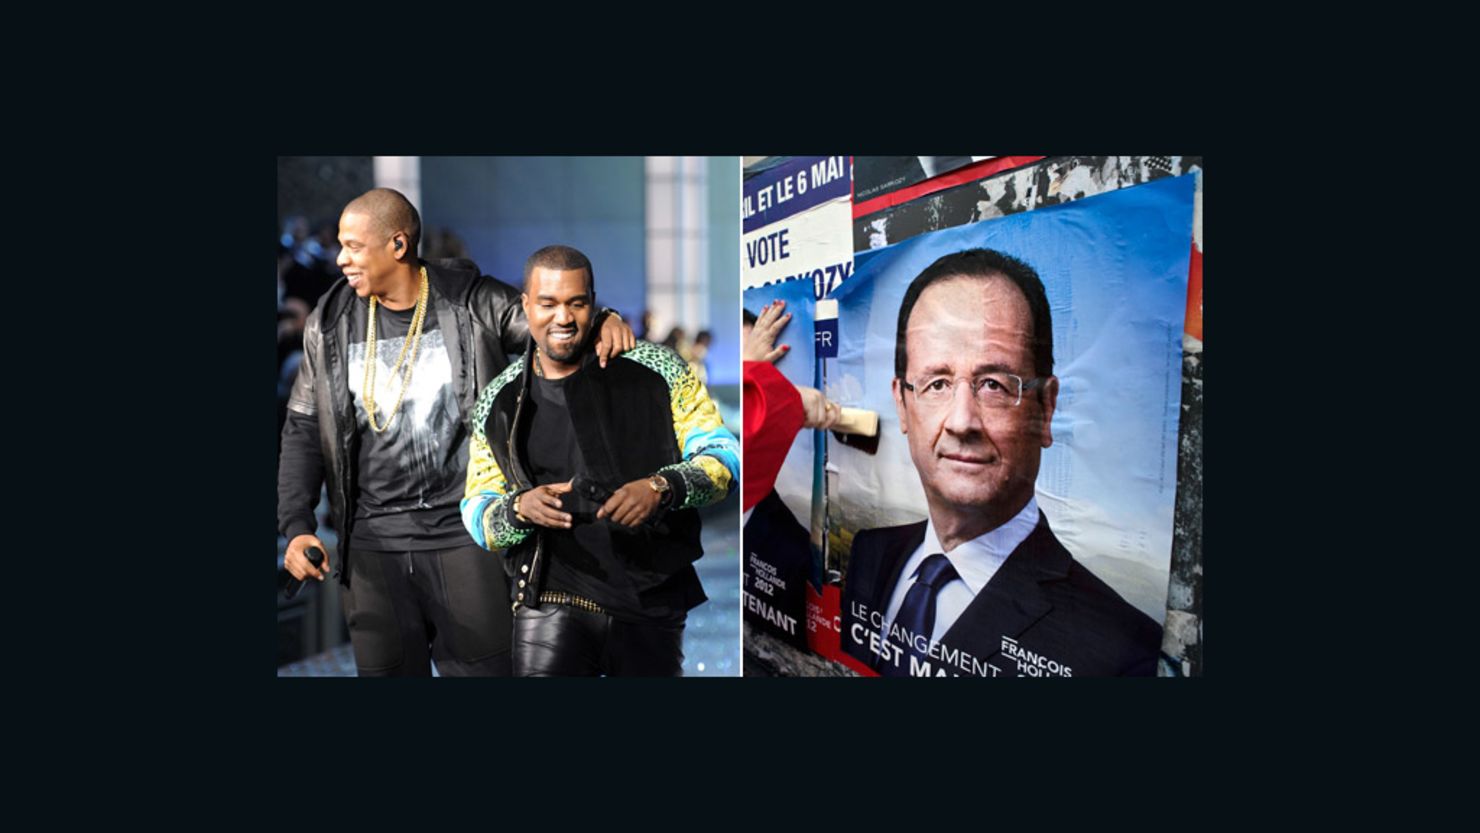 Could a song by Jay-Z and Kanye West help improve the image of French presidential candidate Francois Hollande?